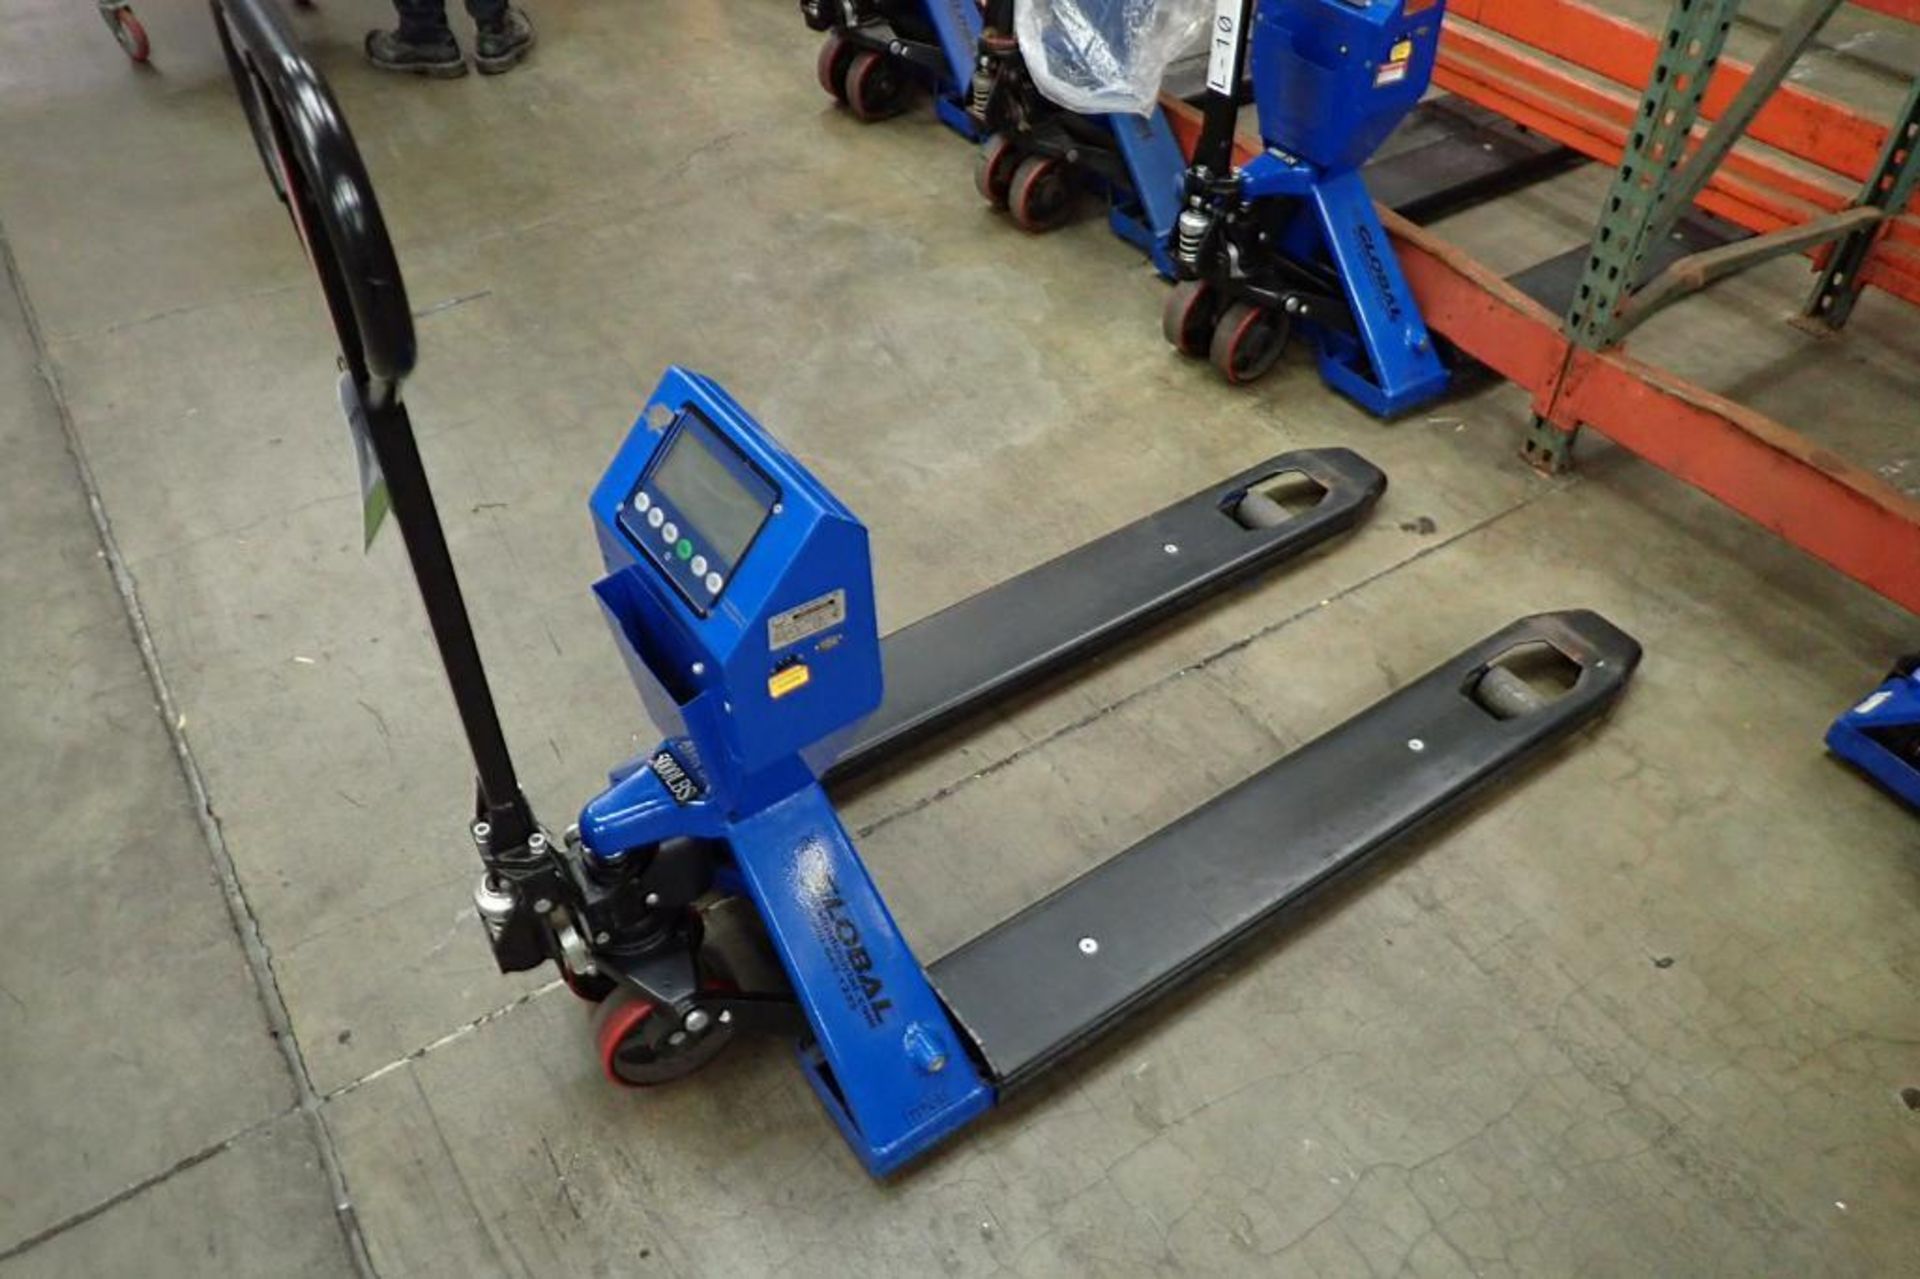 Global Industrial hand pallet jack, SN 382336 with Mettler Toledo on board scale, 5000 lb capacity, - Image 4 of 6